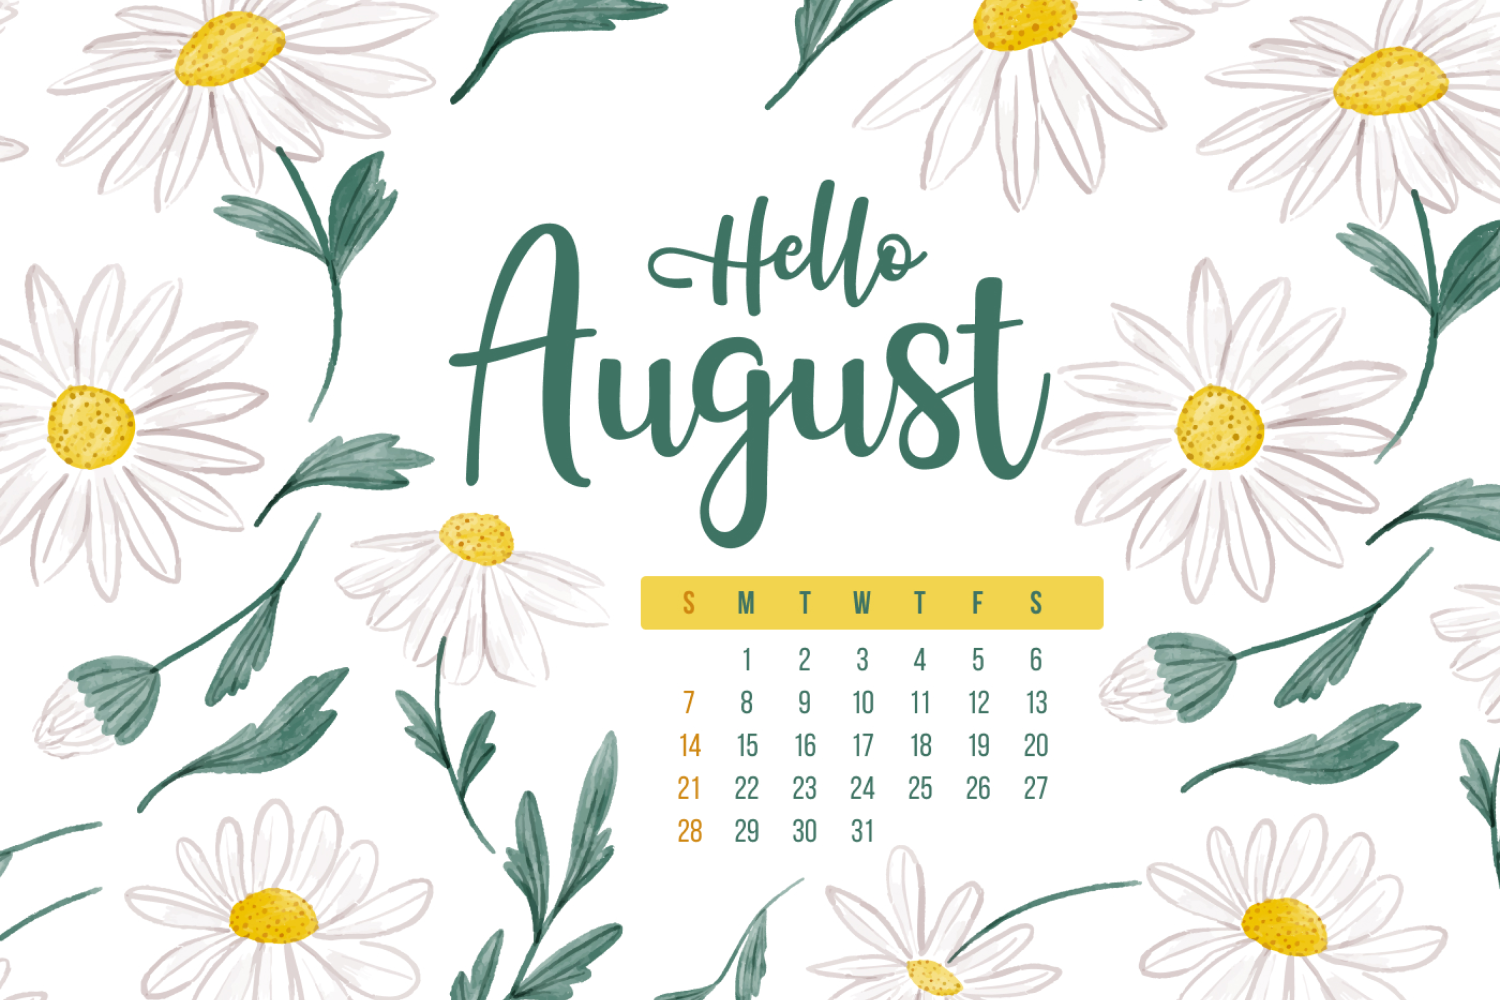 Calendar for August on the background of painted daisies.